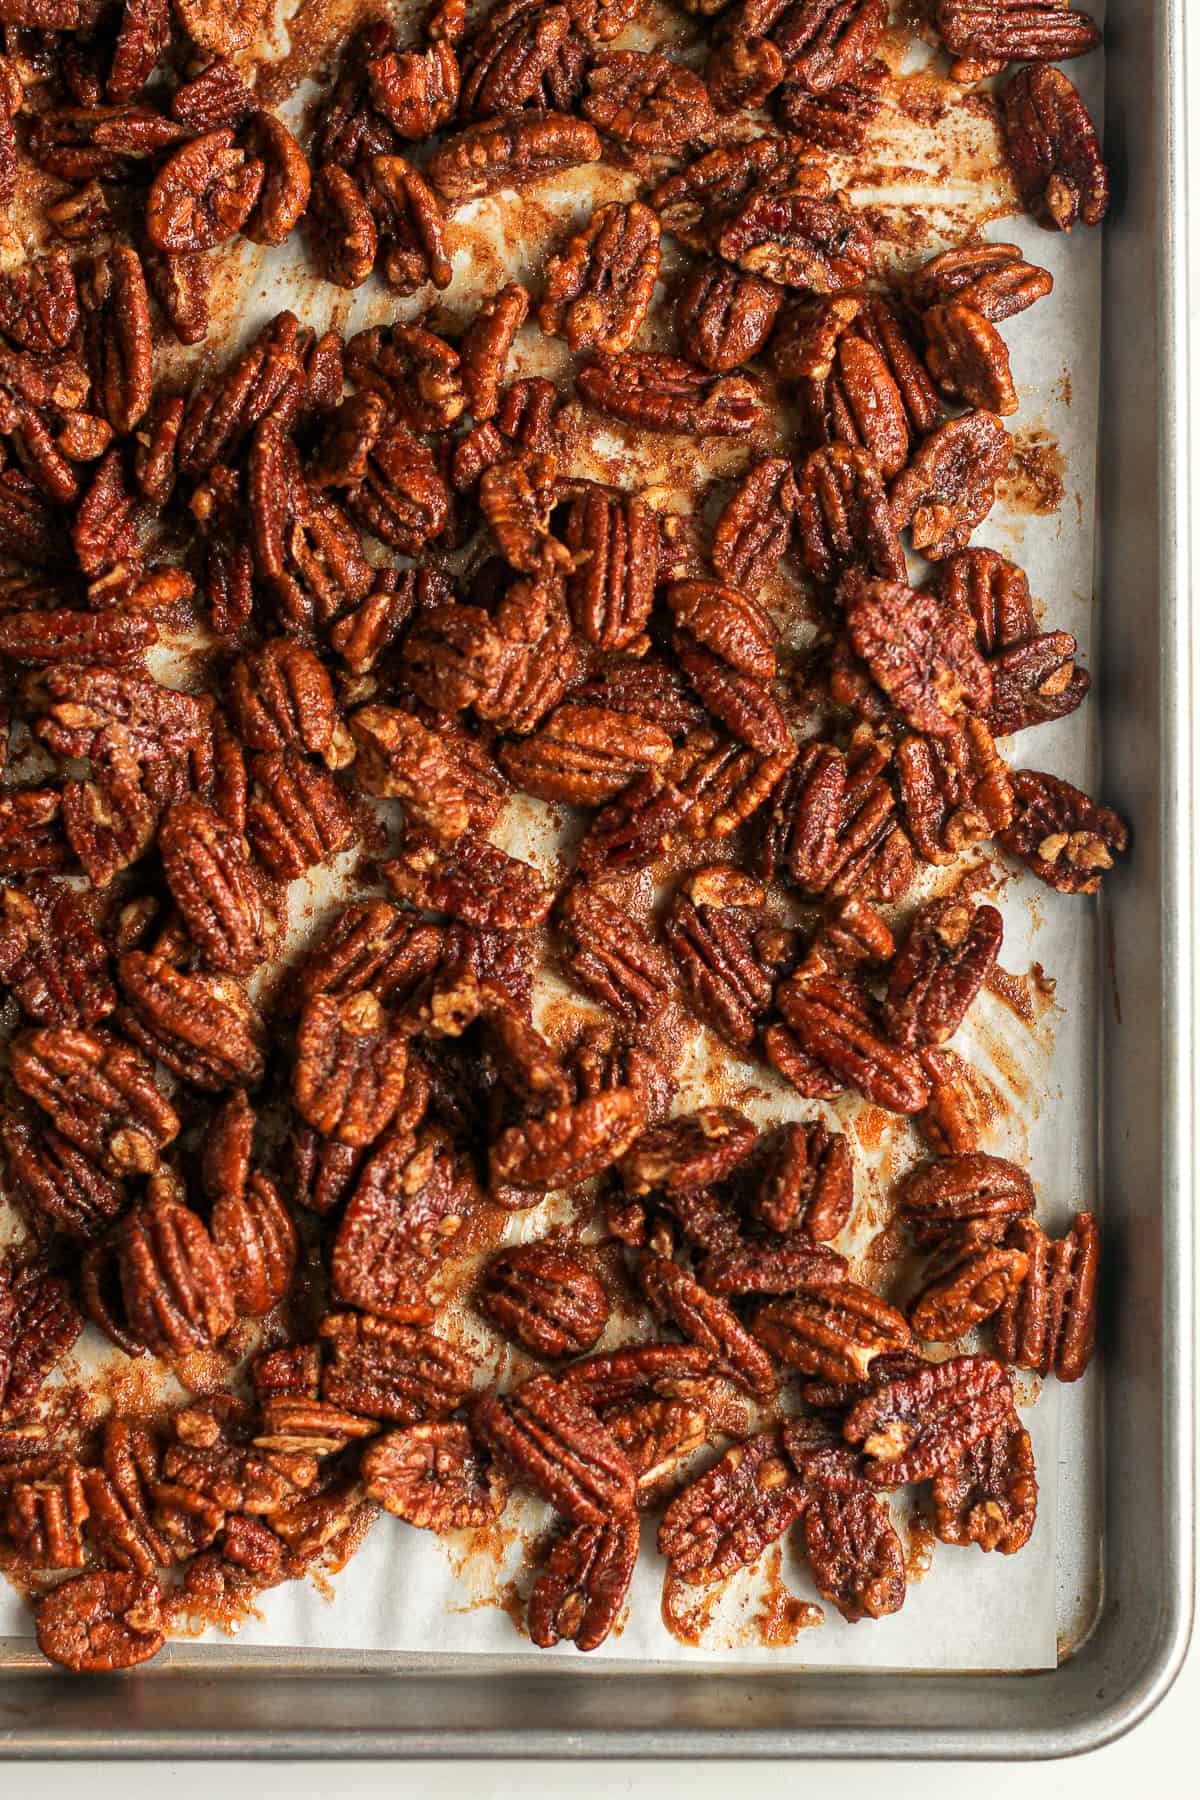 One corner of the pan with candied pecans.